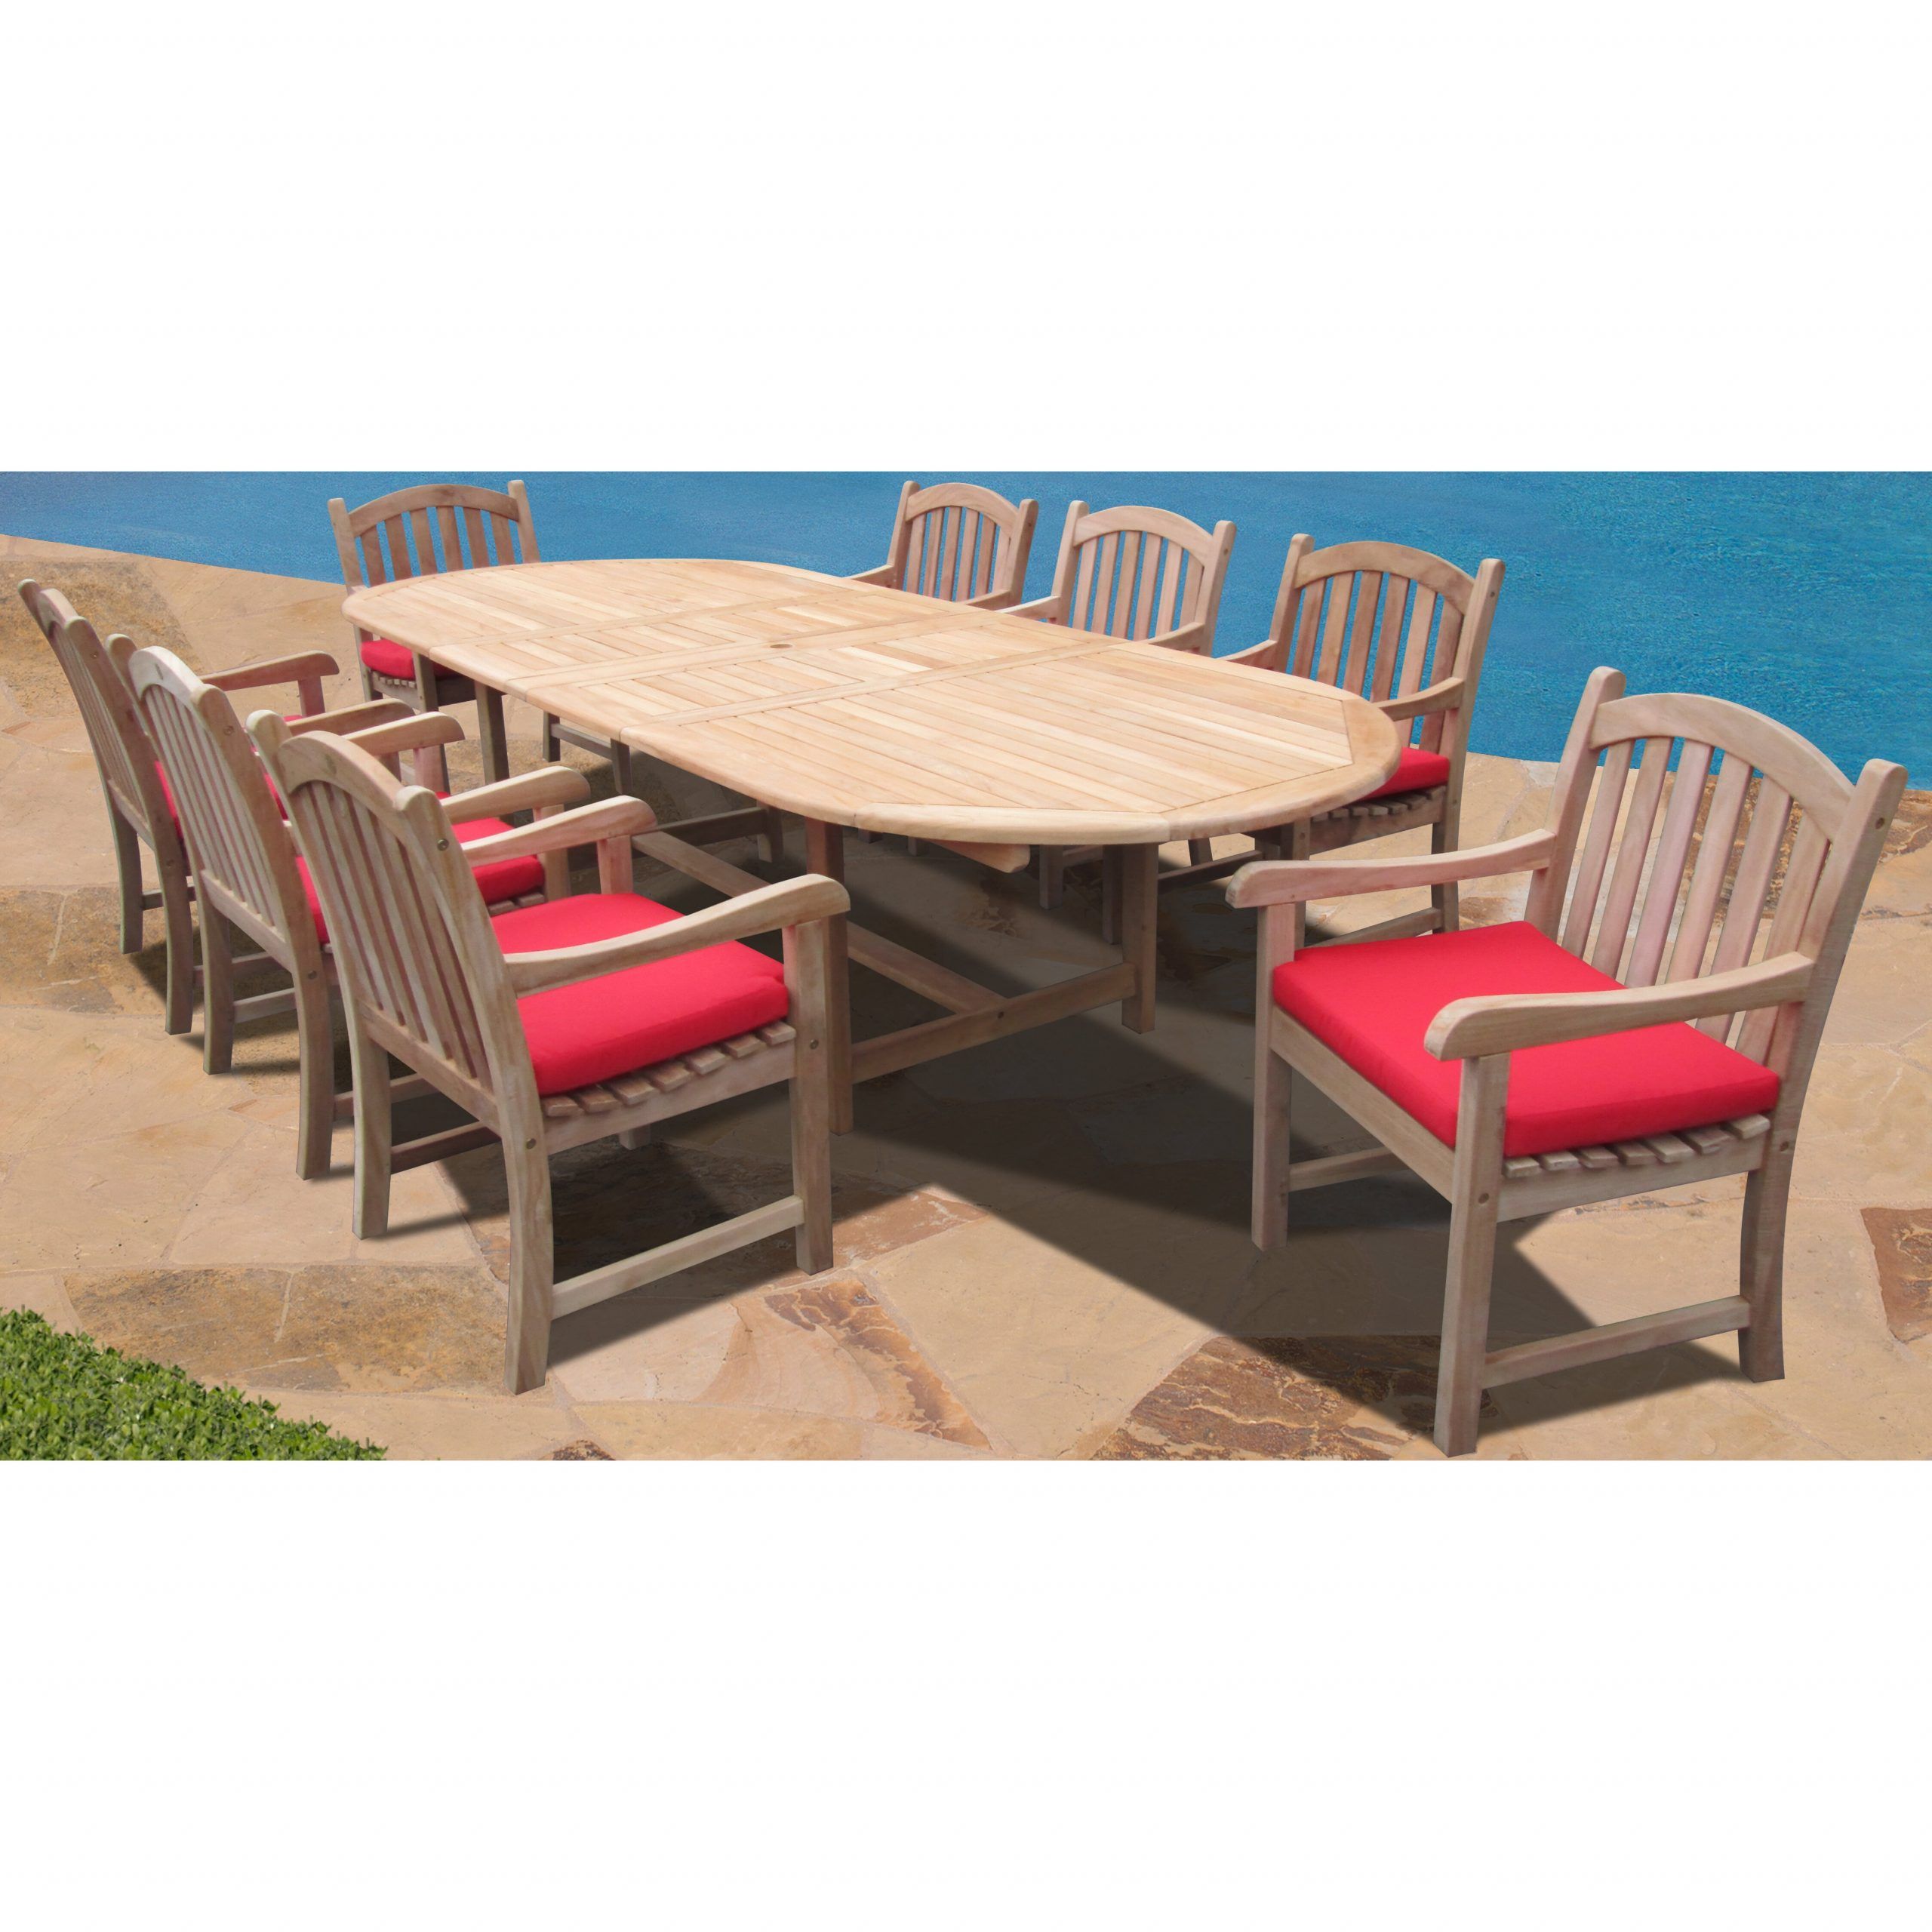 9 Piece Extendable Patio Dining Sets Intended For Famous Forever Patio Verano 9 Piece Dining Set With Cushions & Reviews (View 14 of 15)